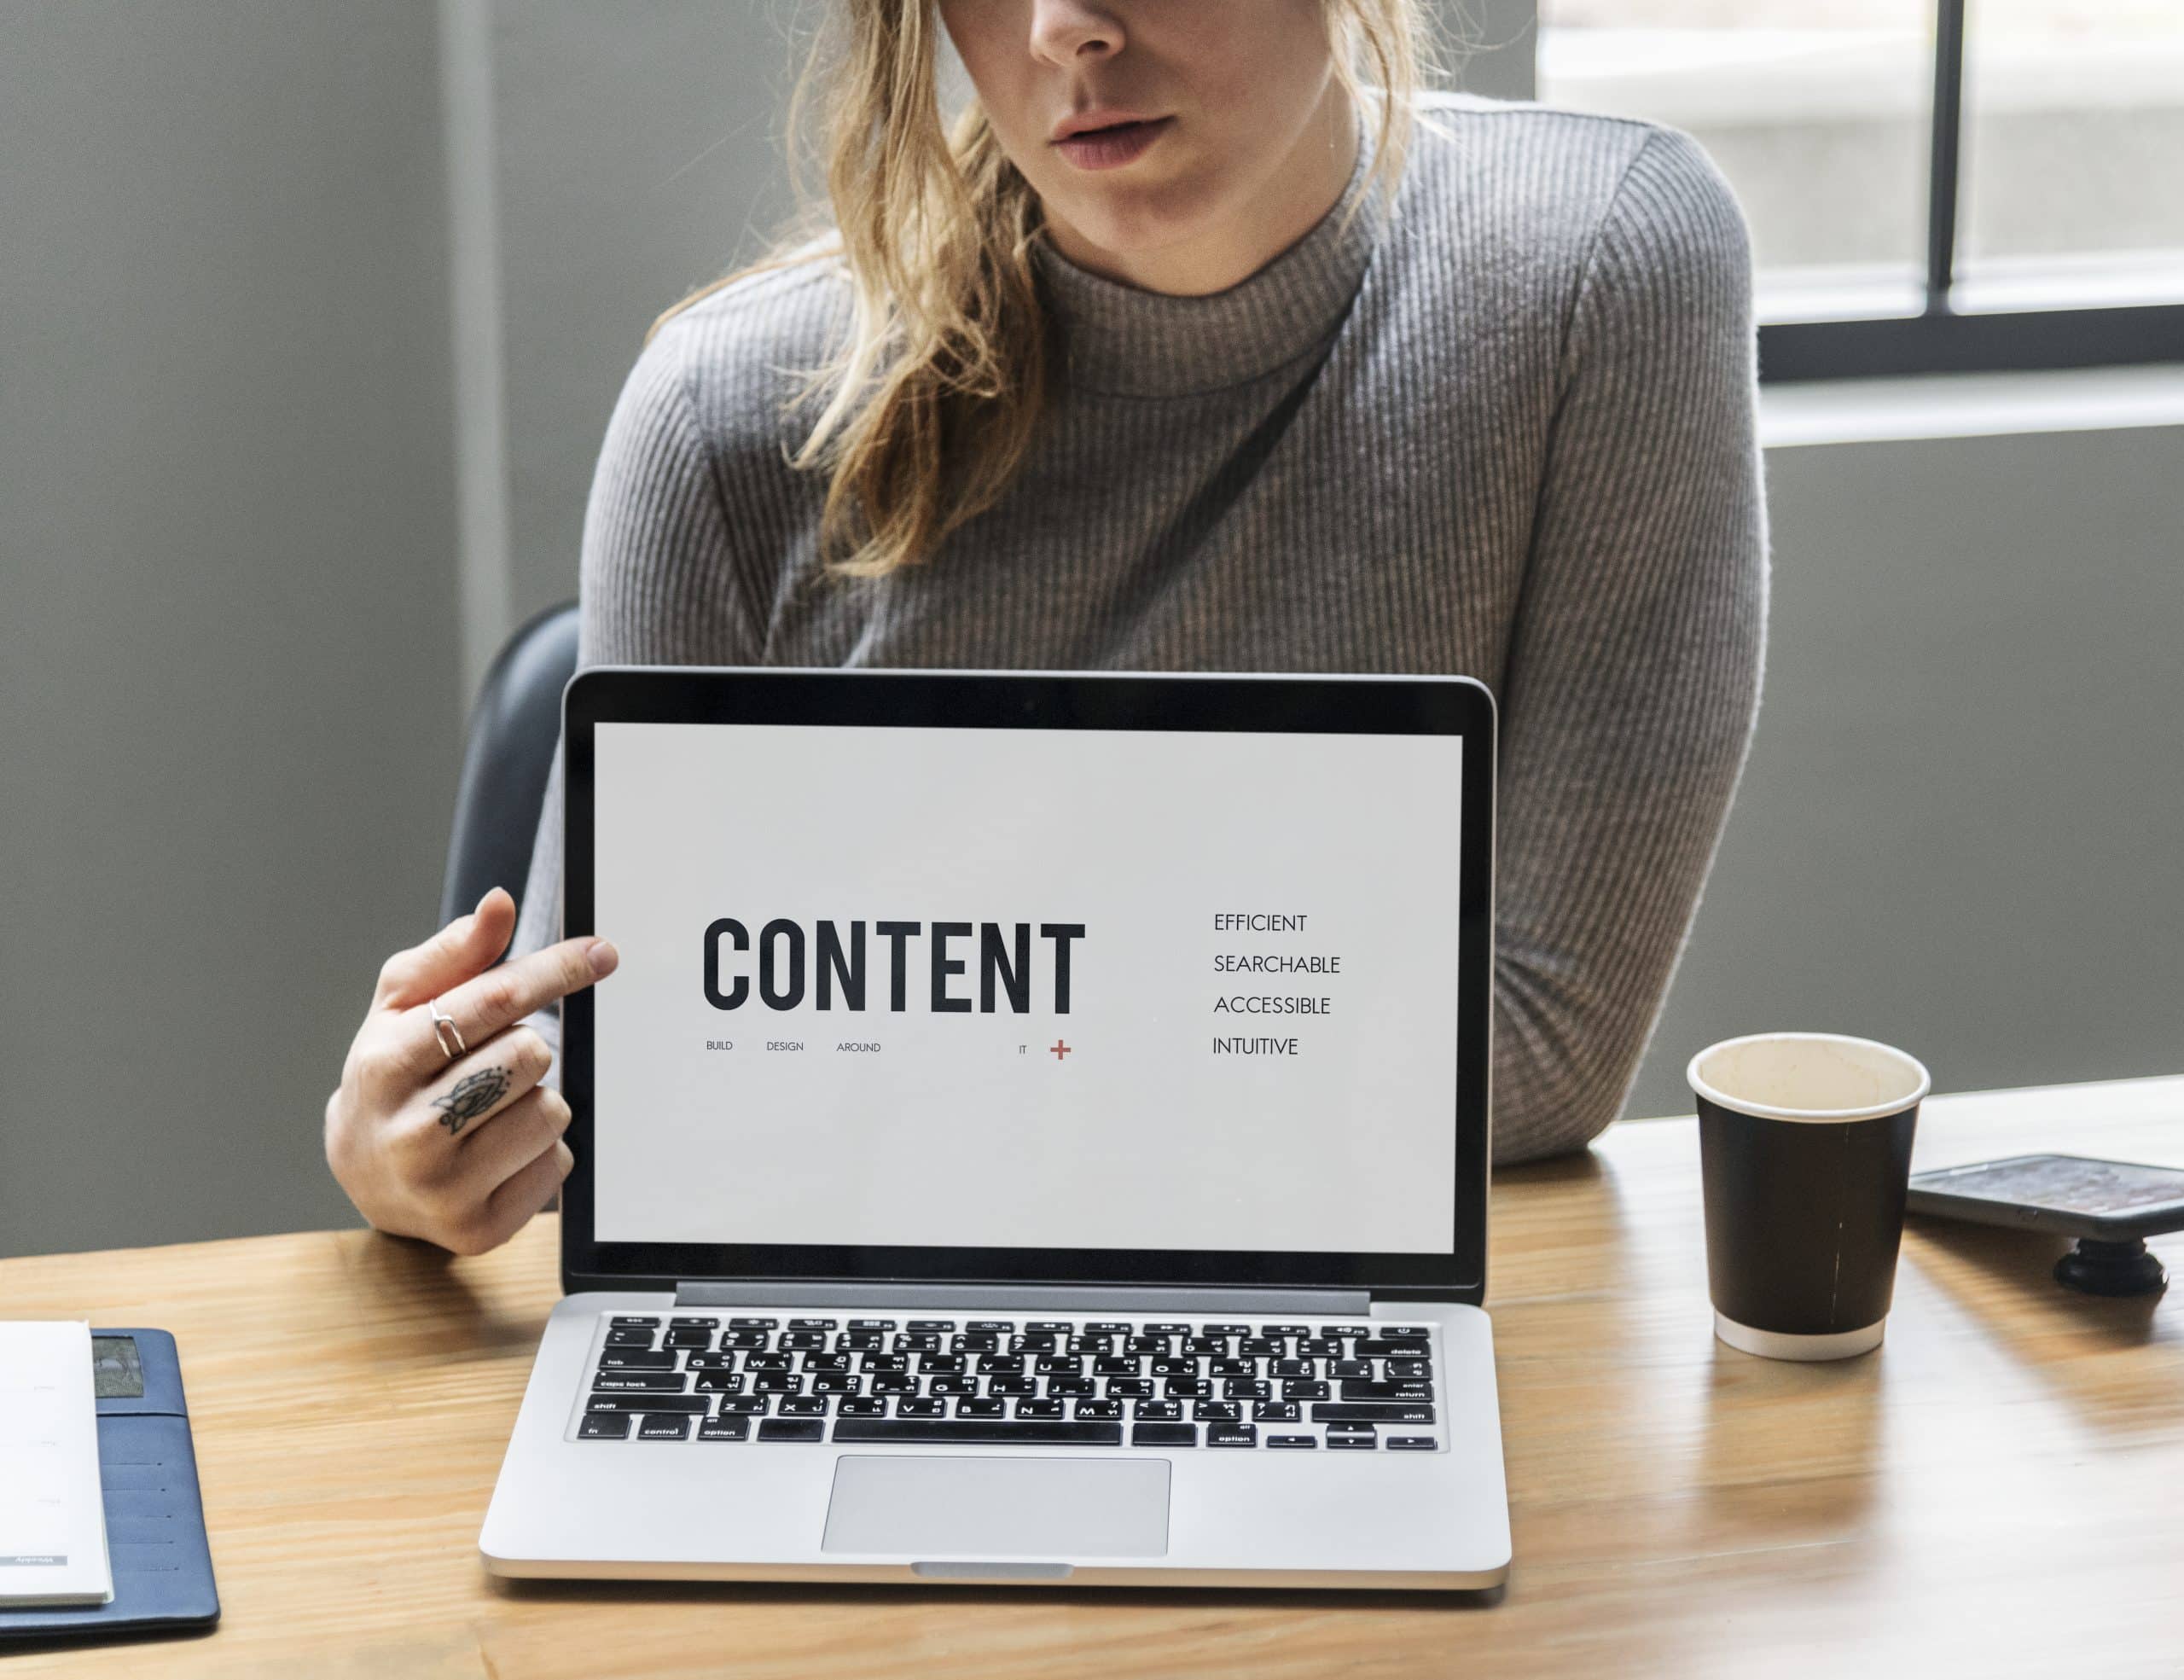 Creating high-quality and engaging content​